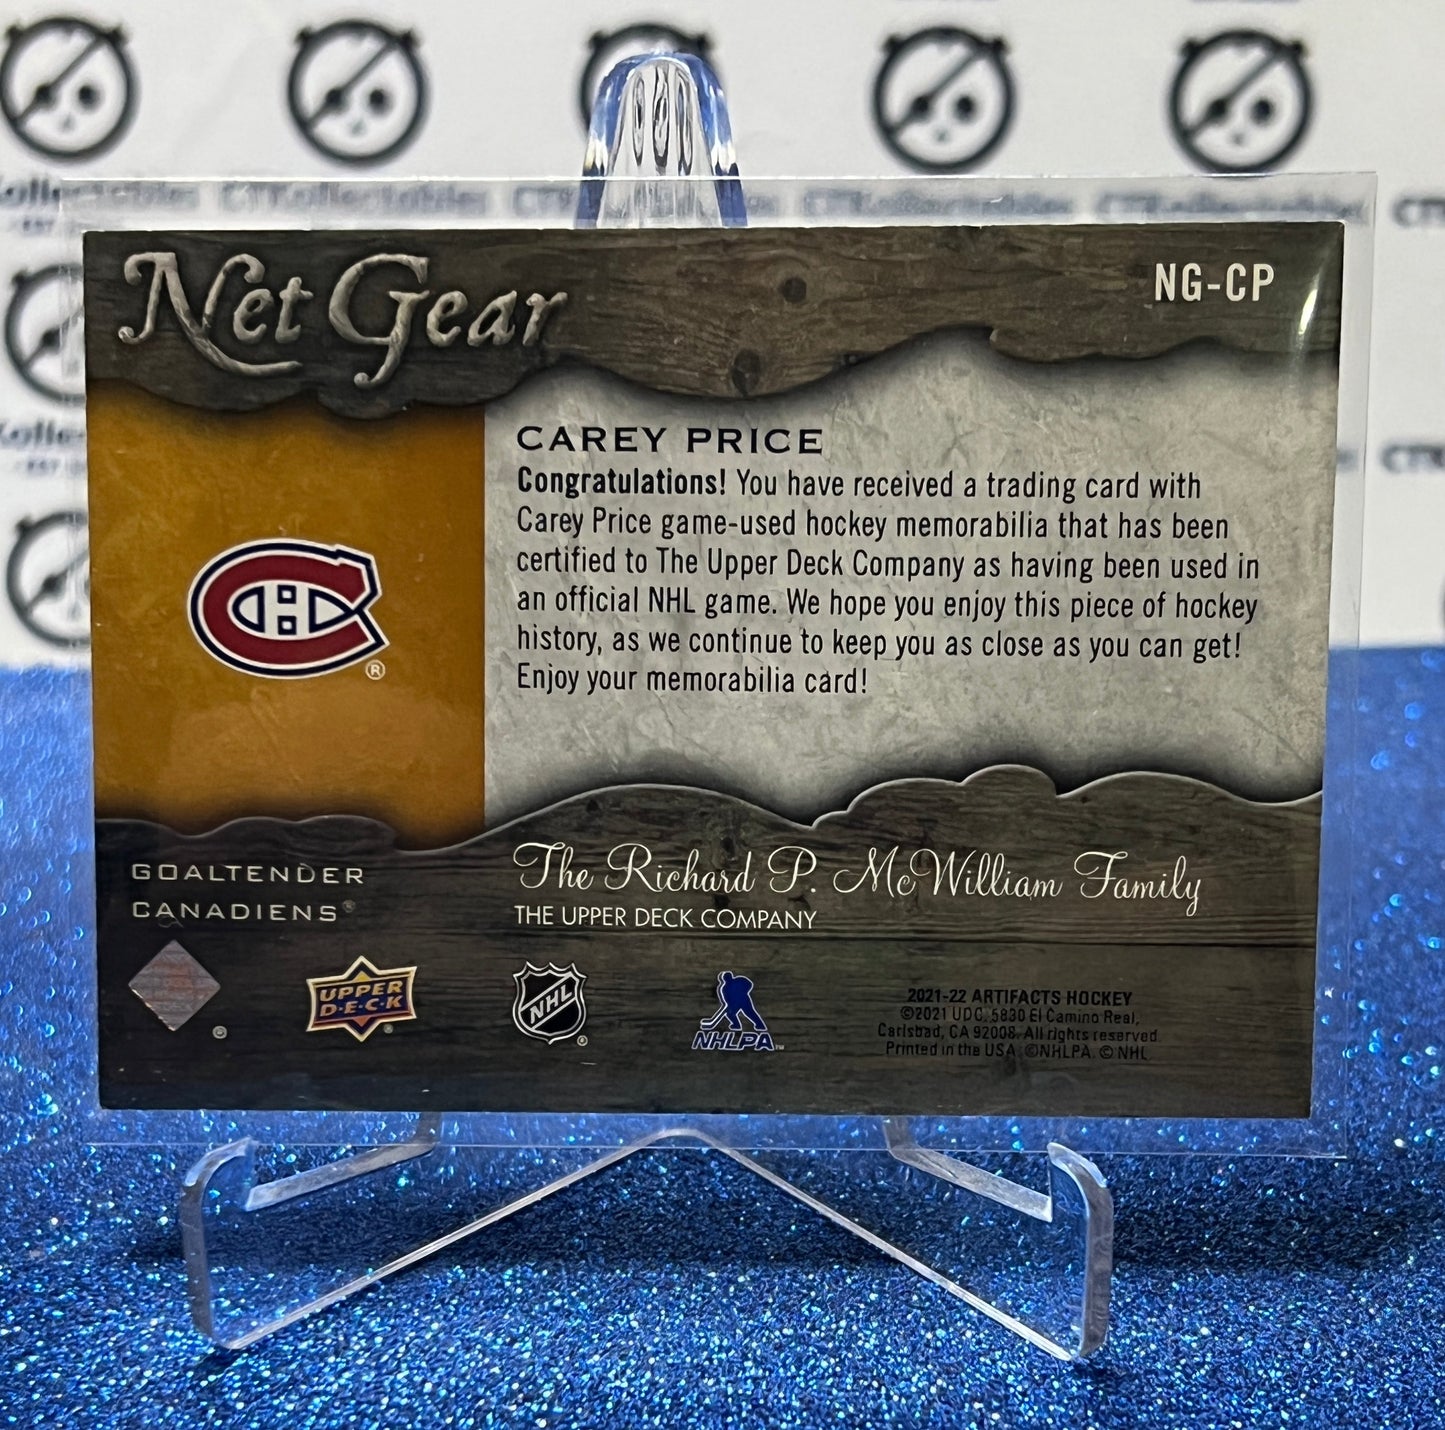 2021-22 UPPER DECK ARTIFACTS CAREY PRICE # NG-CP NET GEAR MONTREAL CANADIENS  HOCKEY CARD